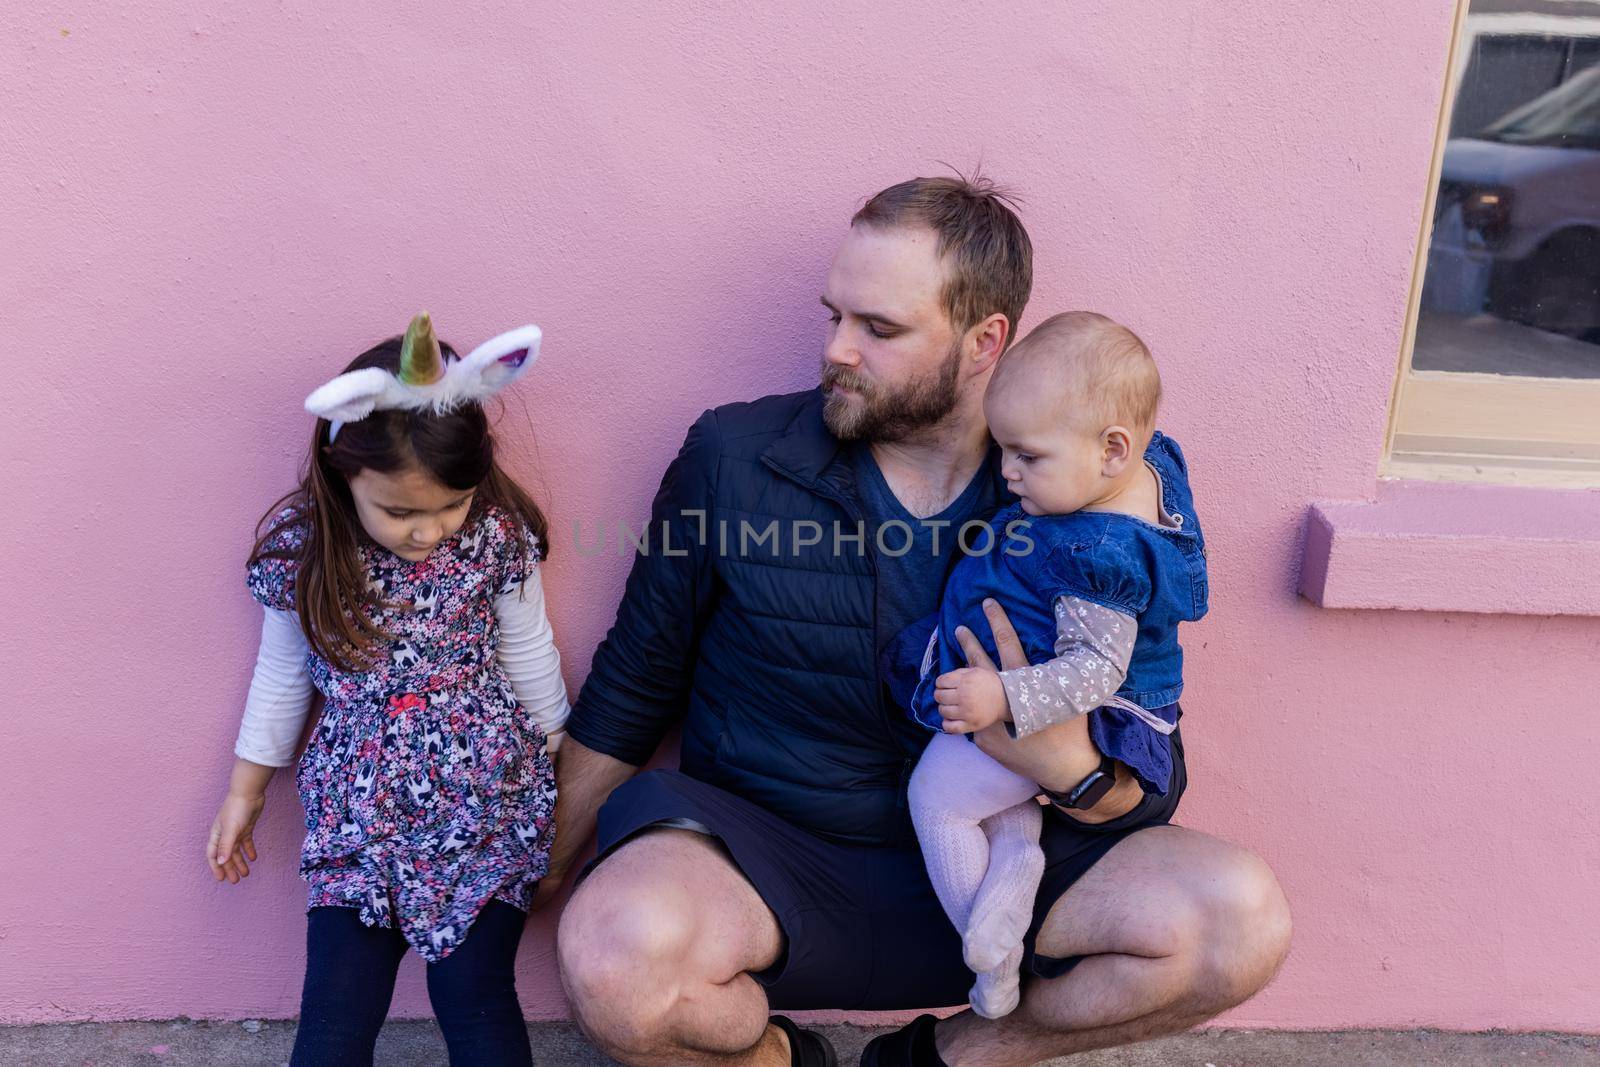 Portrait of young father with his adorable baby and older daughter in front of a pink wall. Cute child wearing unicorn headband next to baby and bearded man with pink background. Happy family outdoors